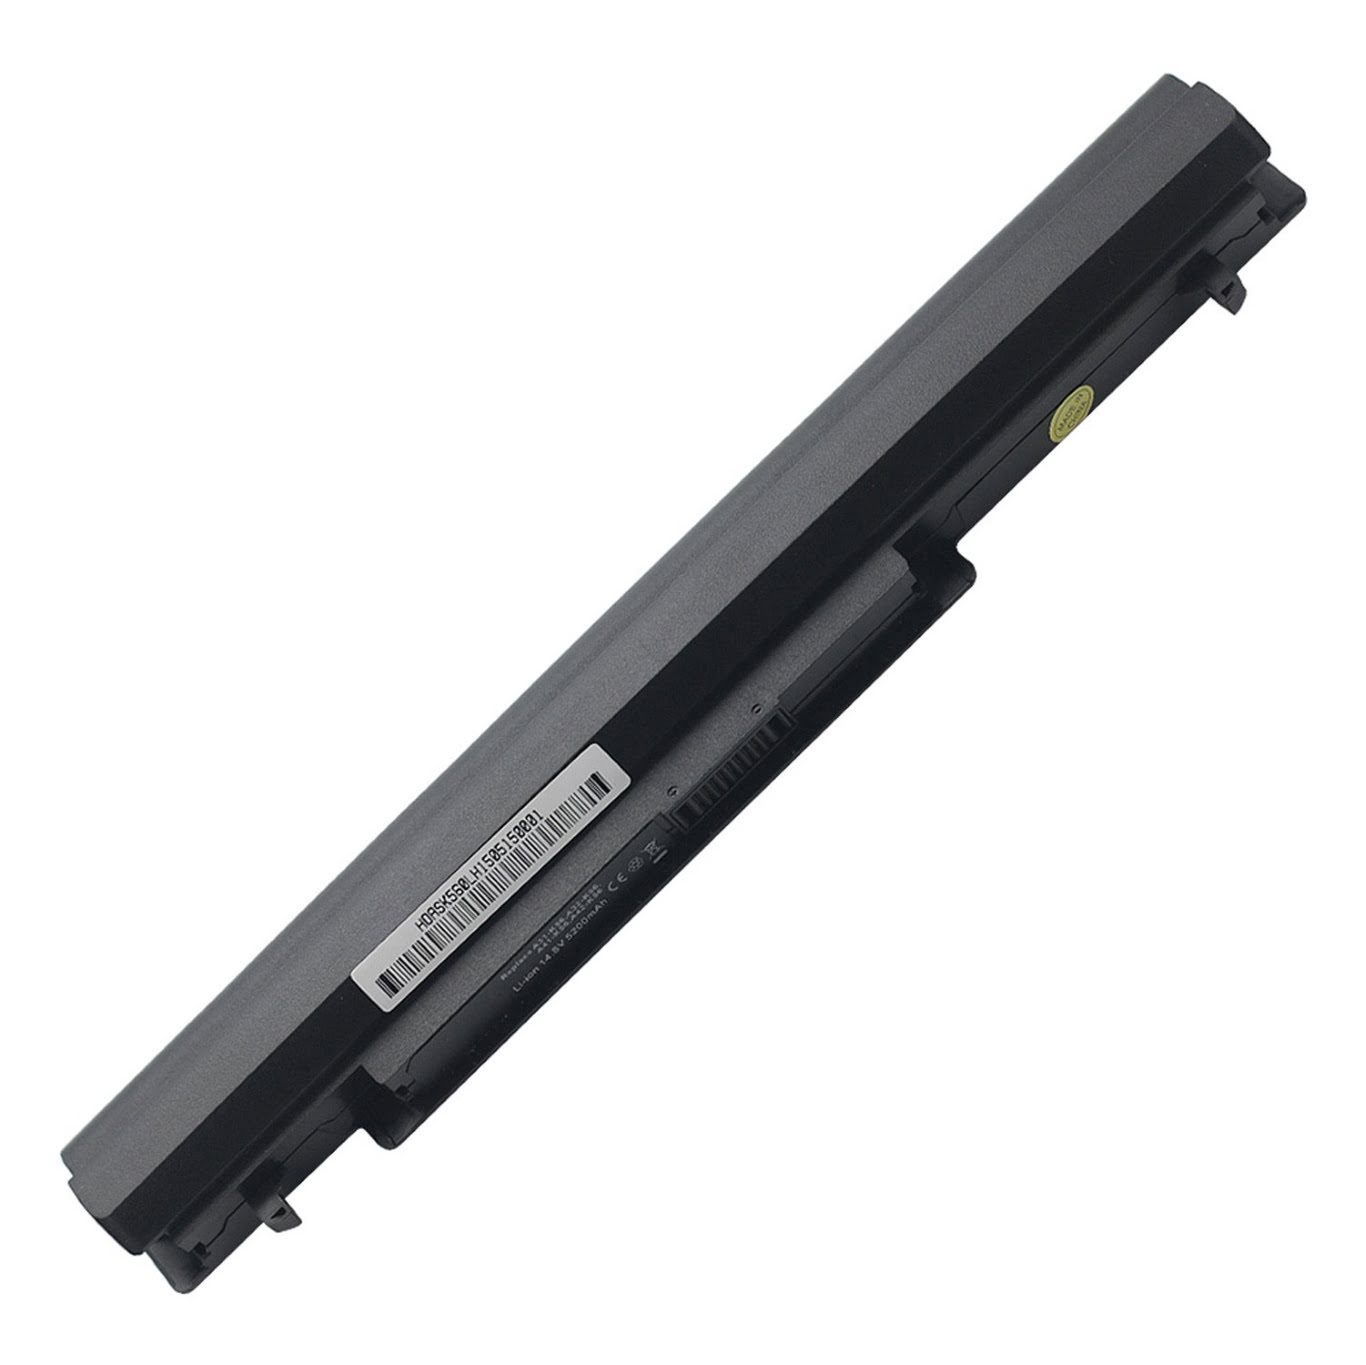 A31-K56, A32-K56 replacement Laptop Battery for Asus A46C, A46CA, 8 cells, 14.8V, 4400mAh